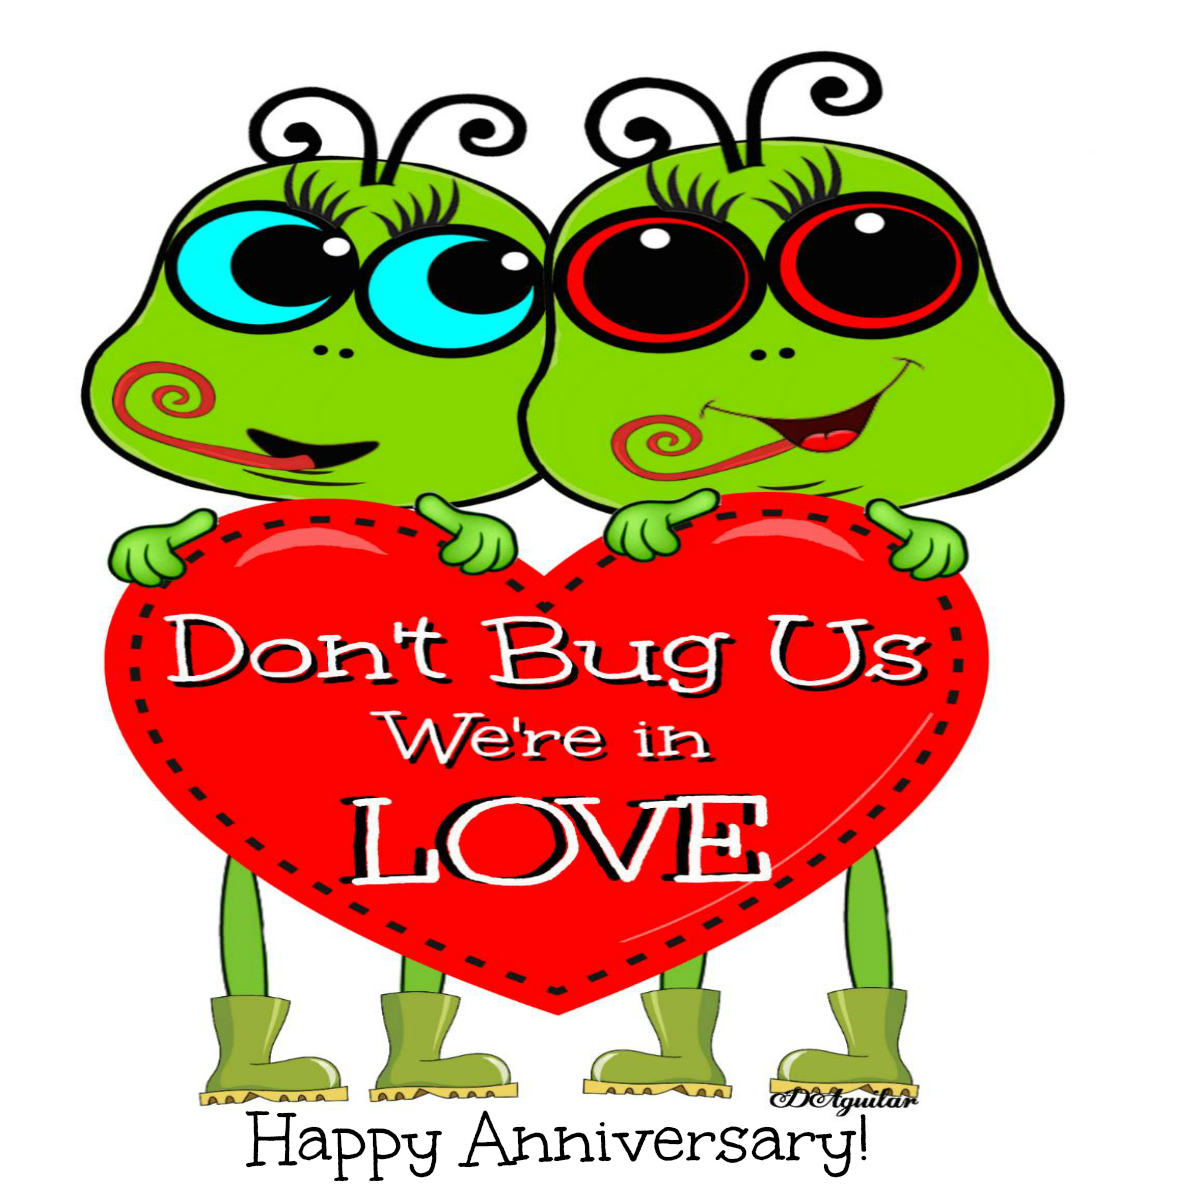 Happy Anniversary Bugs - Facebook Greeting